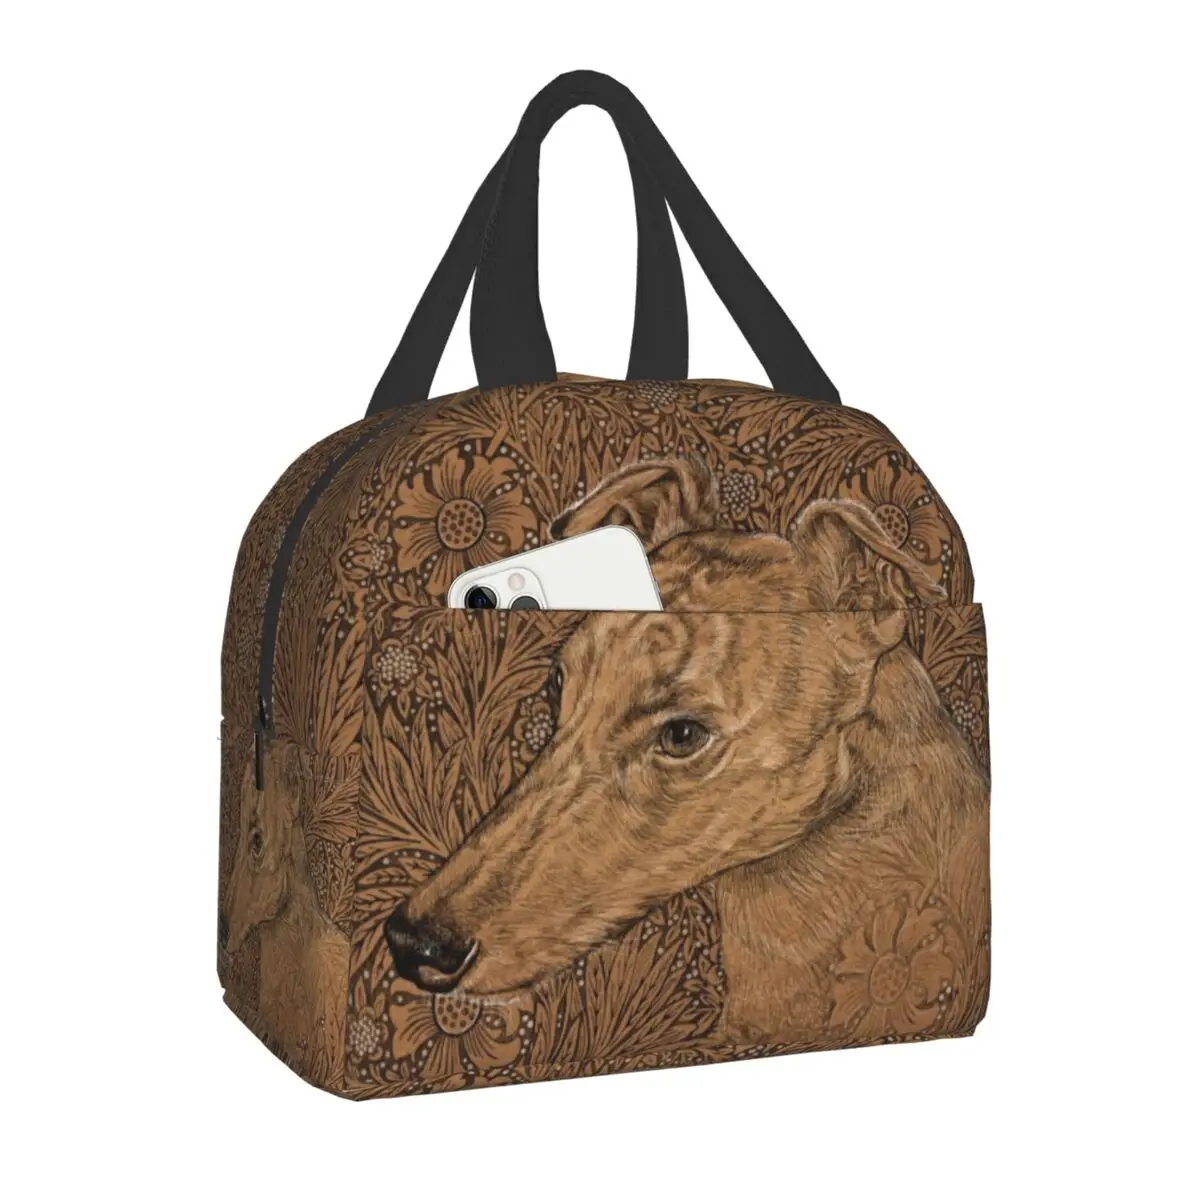 Greyhound On William Morris Marigolds Insulated Lunch Bag for Women Whippet Dog Cooler Thermal Lunch Box Beach Camping Picnic